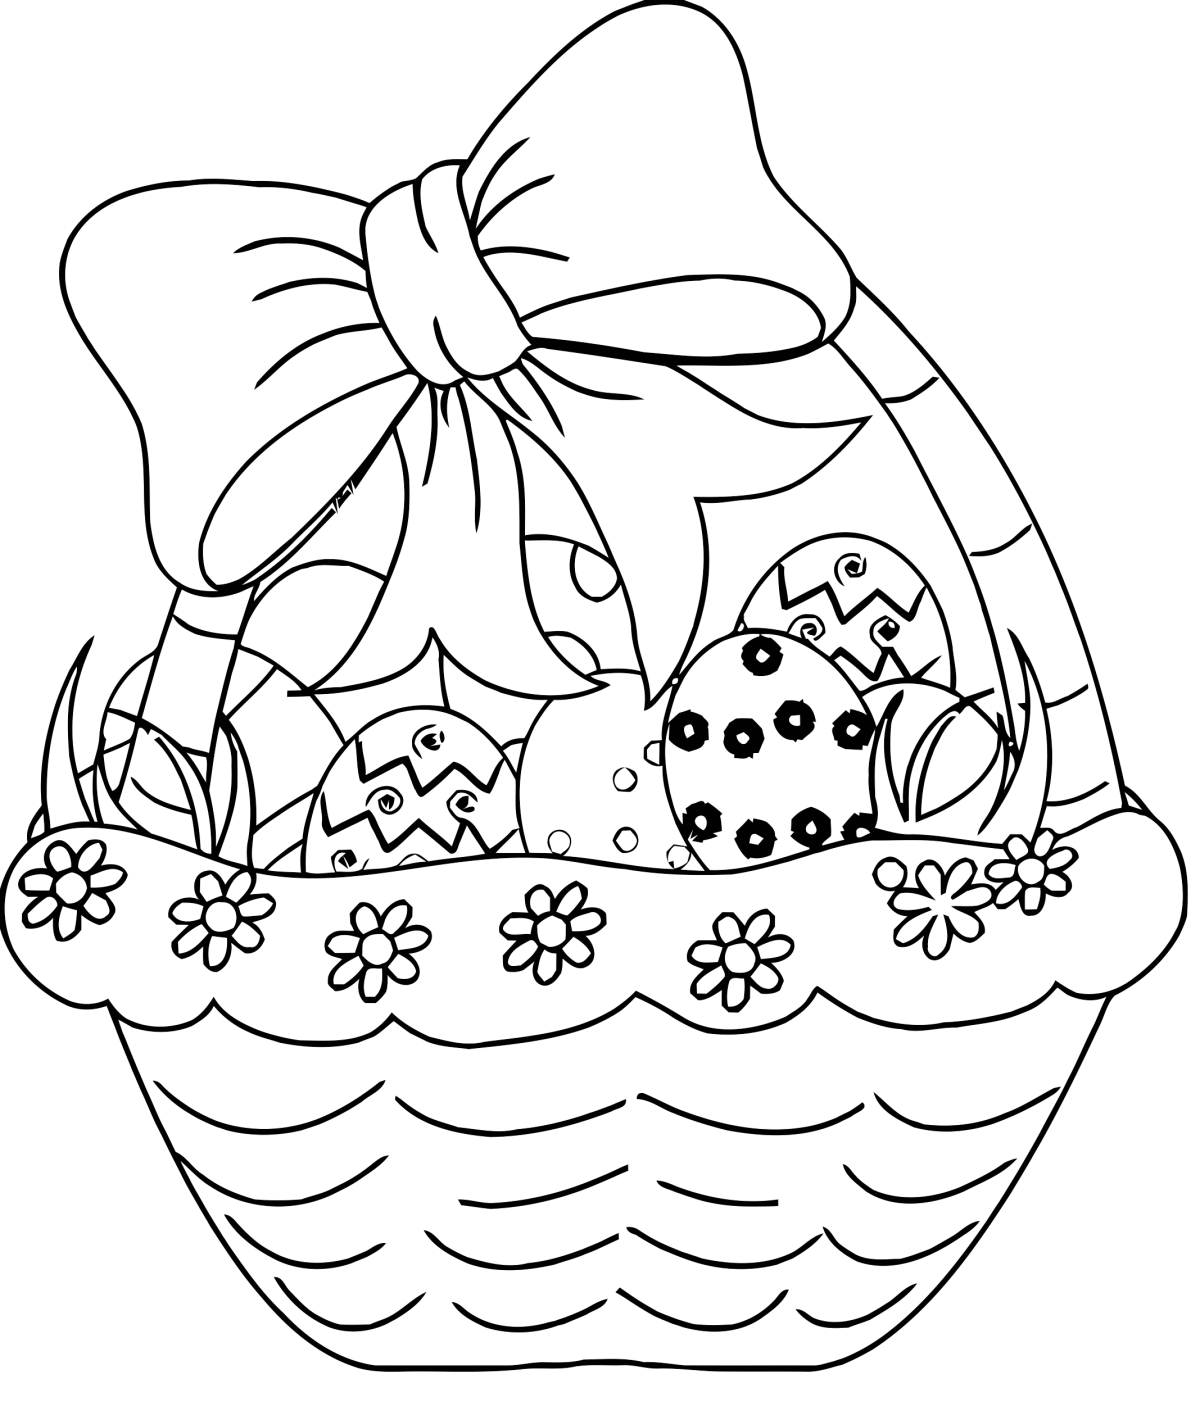 Passover image to download and color Easter Kids Coloring Pages